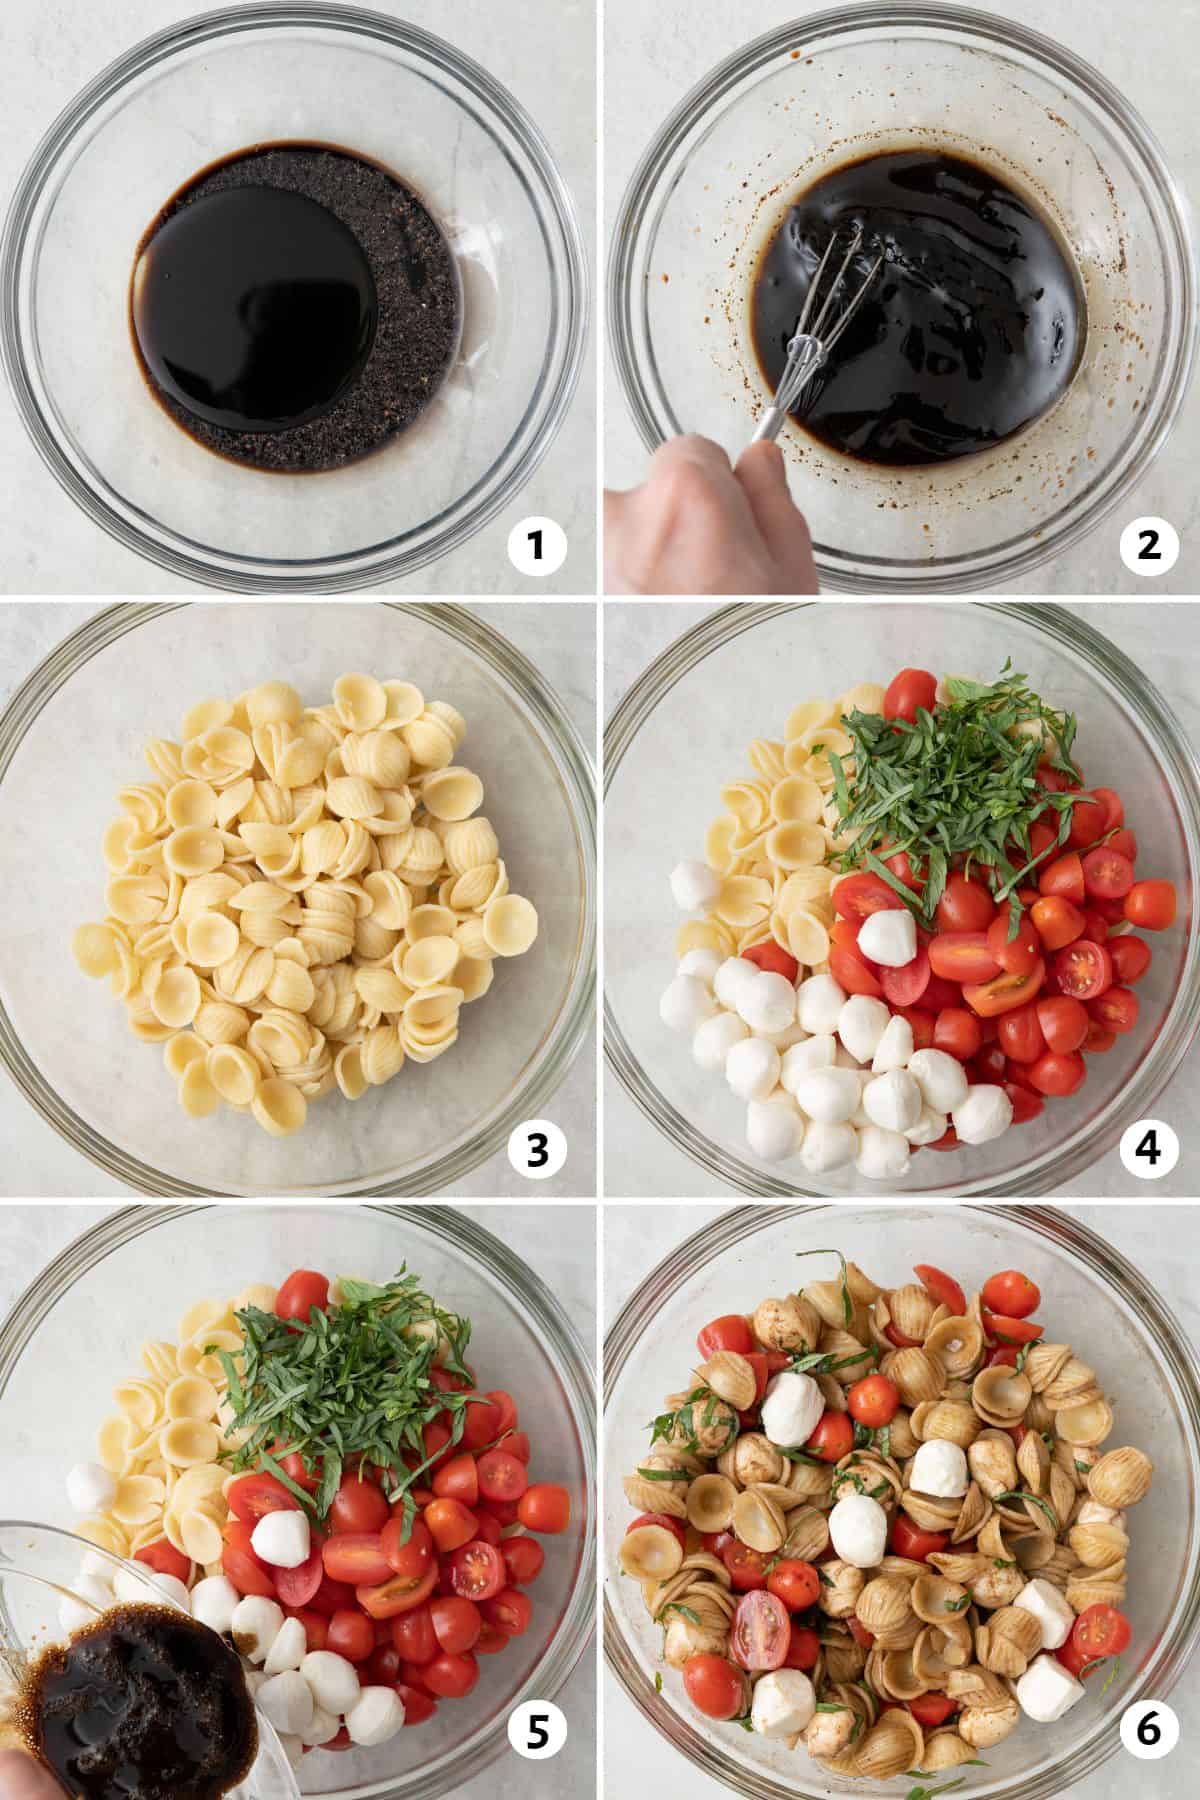 6 image collage making recipe: 1- vinegar in a bowl, 2- whisking together with seasoning, 3- cooked pasta in bowl, 4- tomato, basil, and cheese added, 5- dressing poured over, 6- ingredients tossed together with dressing.